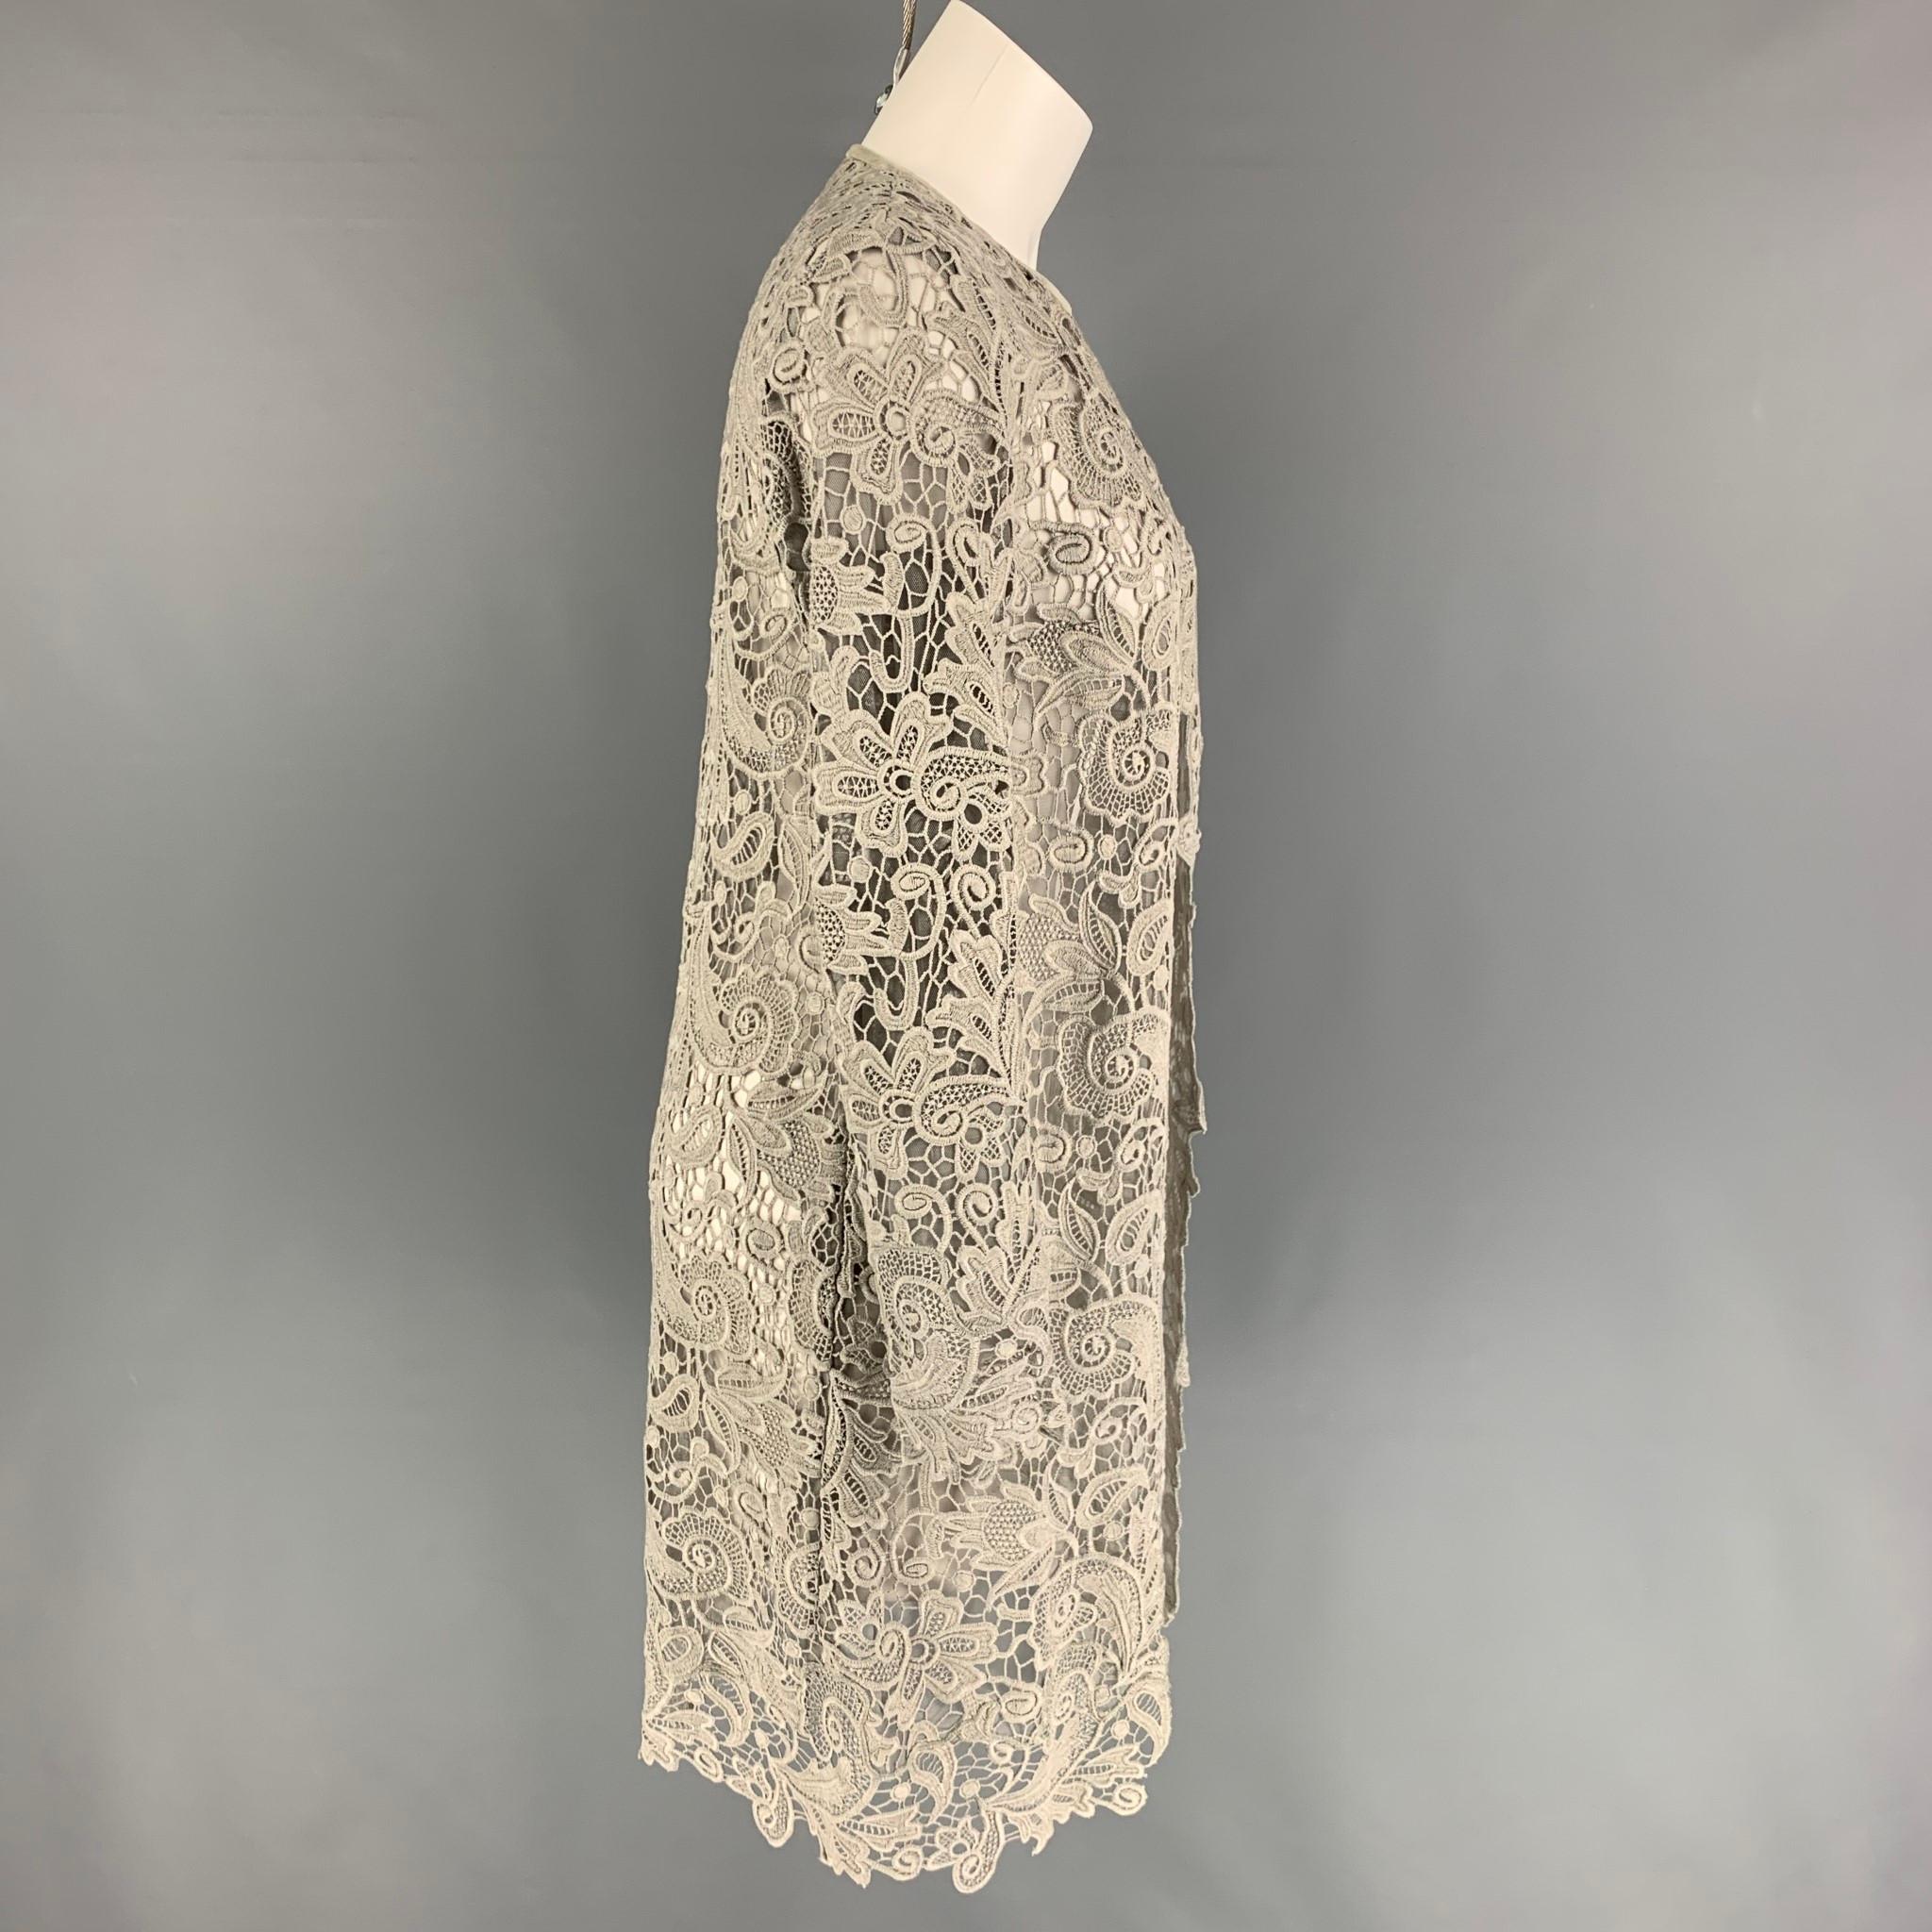 RALPH LAUREN 'Black Label' coat comes in a taupe lace cotton featuring a leather trim, collarless, and a open front. 

Very Good Pre-Owned Condition.
Marked: 2

Measurements:

Shoulder: 15 in.
Bust: 32 in.
Sleeve: 24 in.
Length: 37 in. 